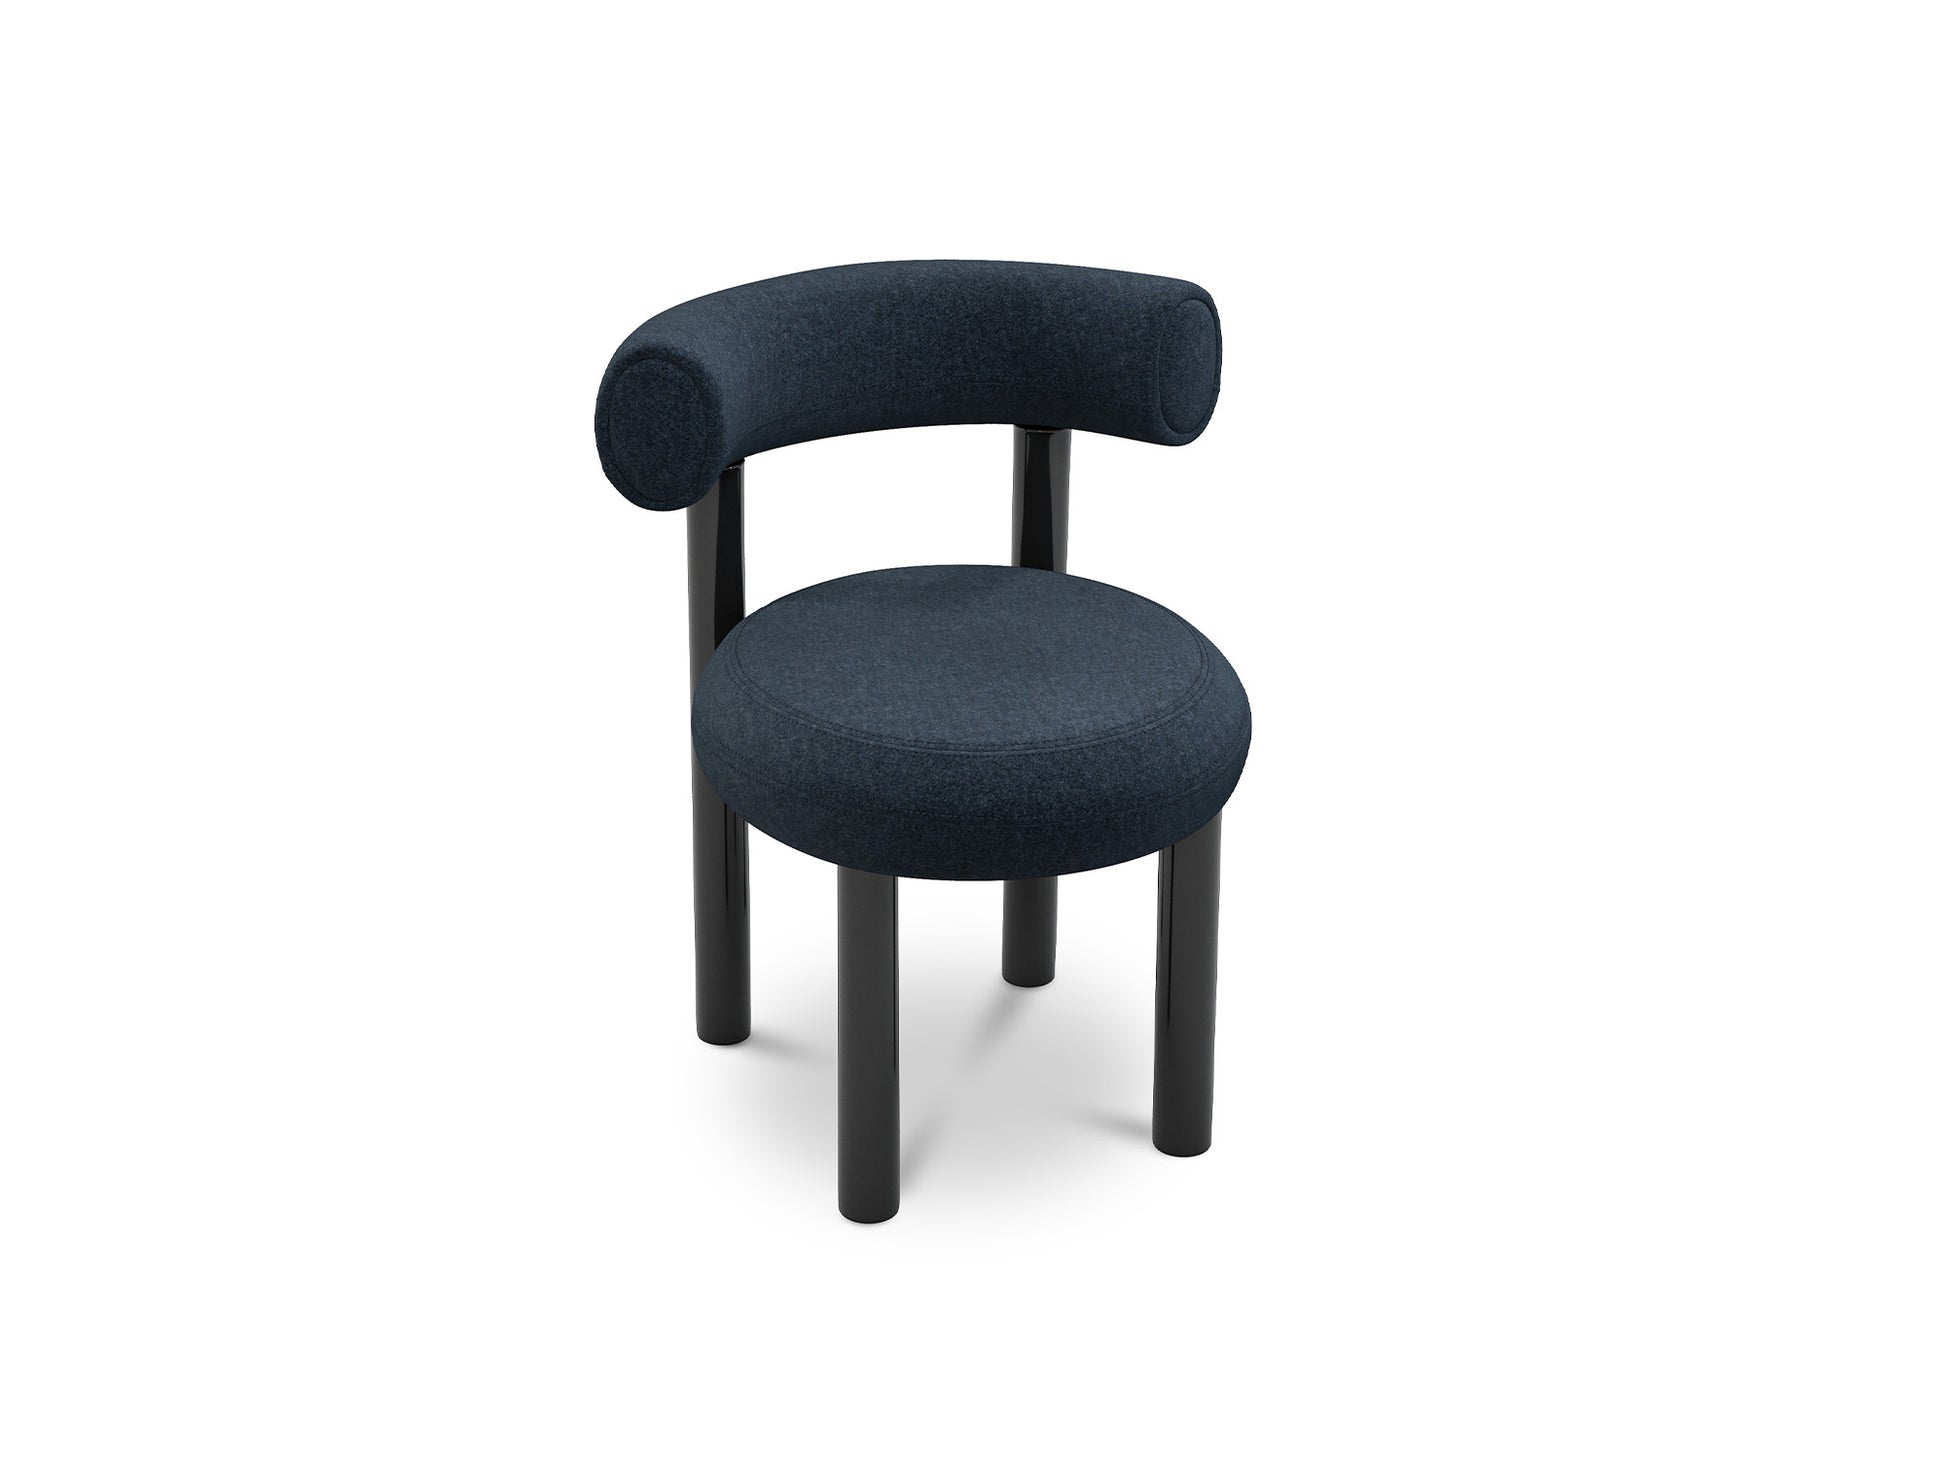 Fat Dining Chair by Tom Dixon - Melange Nap 791